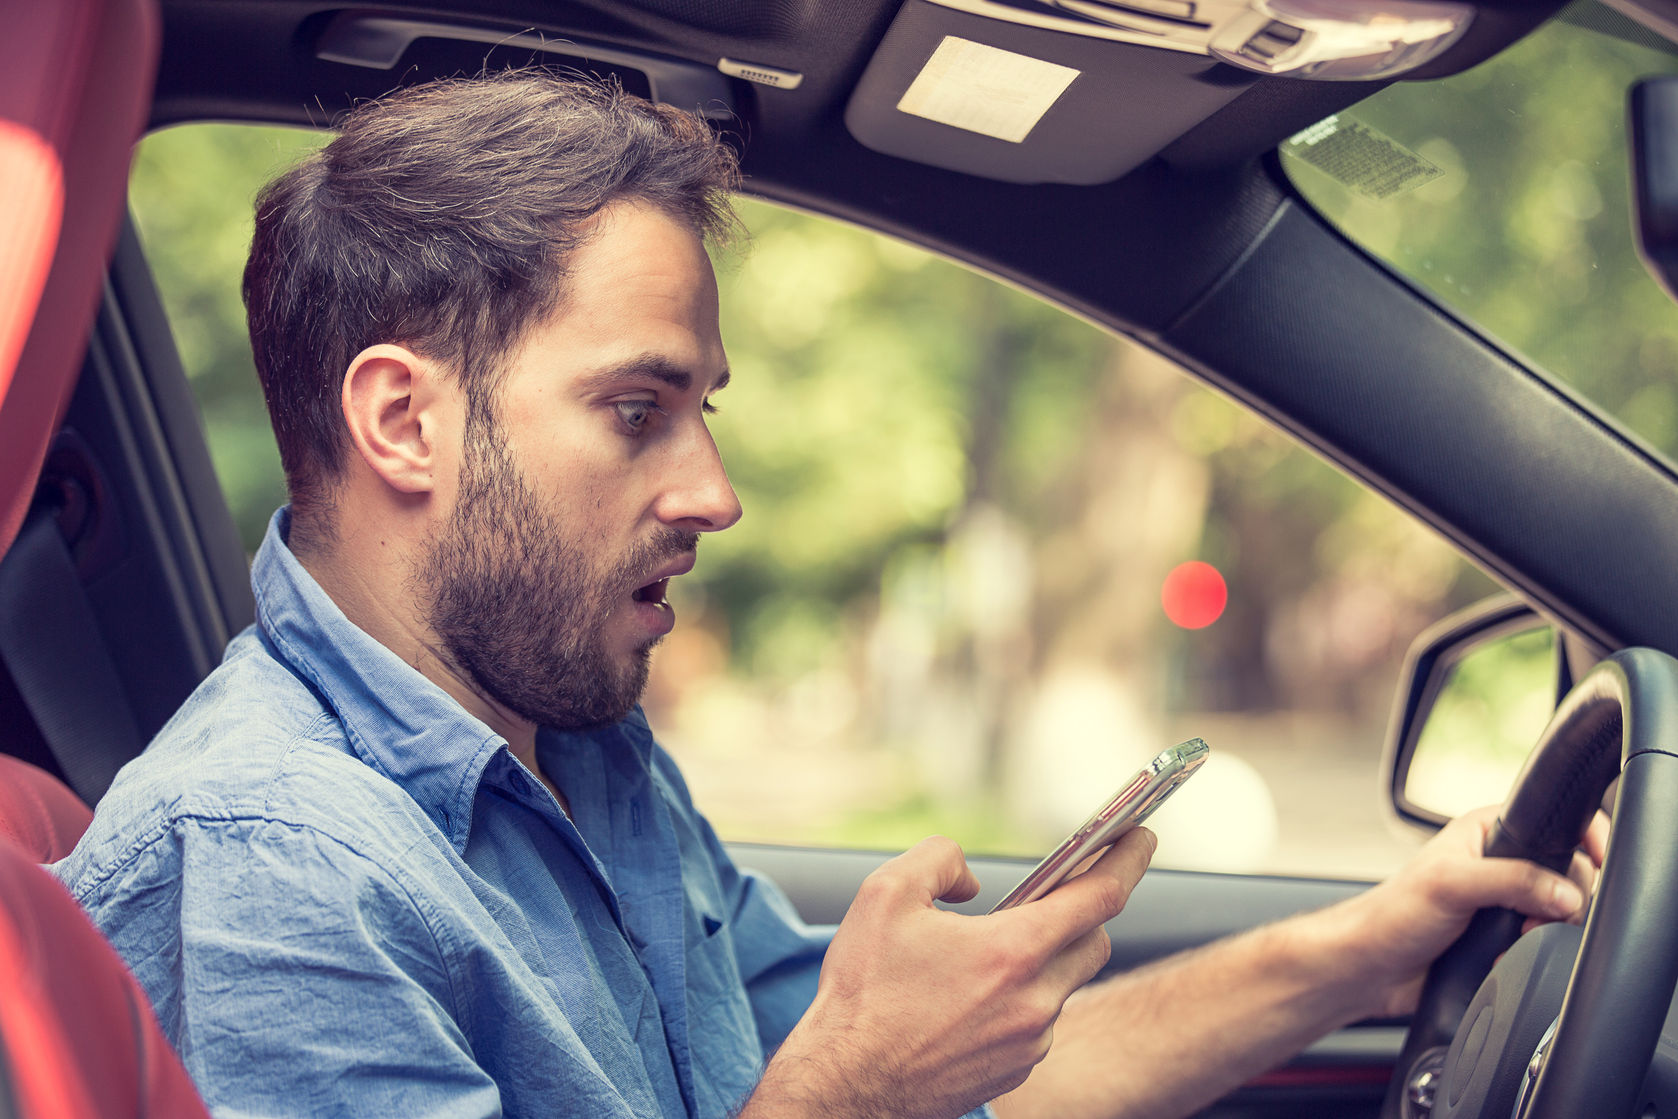 france texting while driving man sitting in car with mobile phone hand